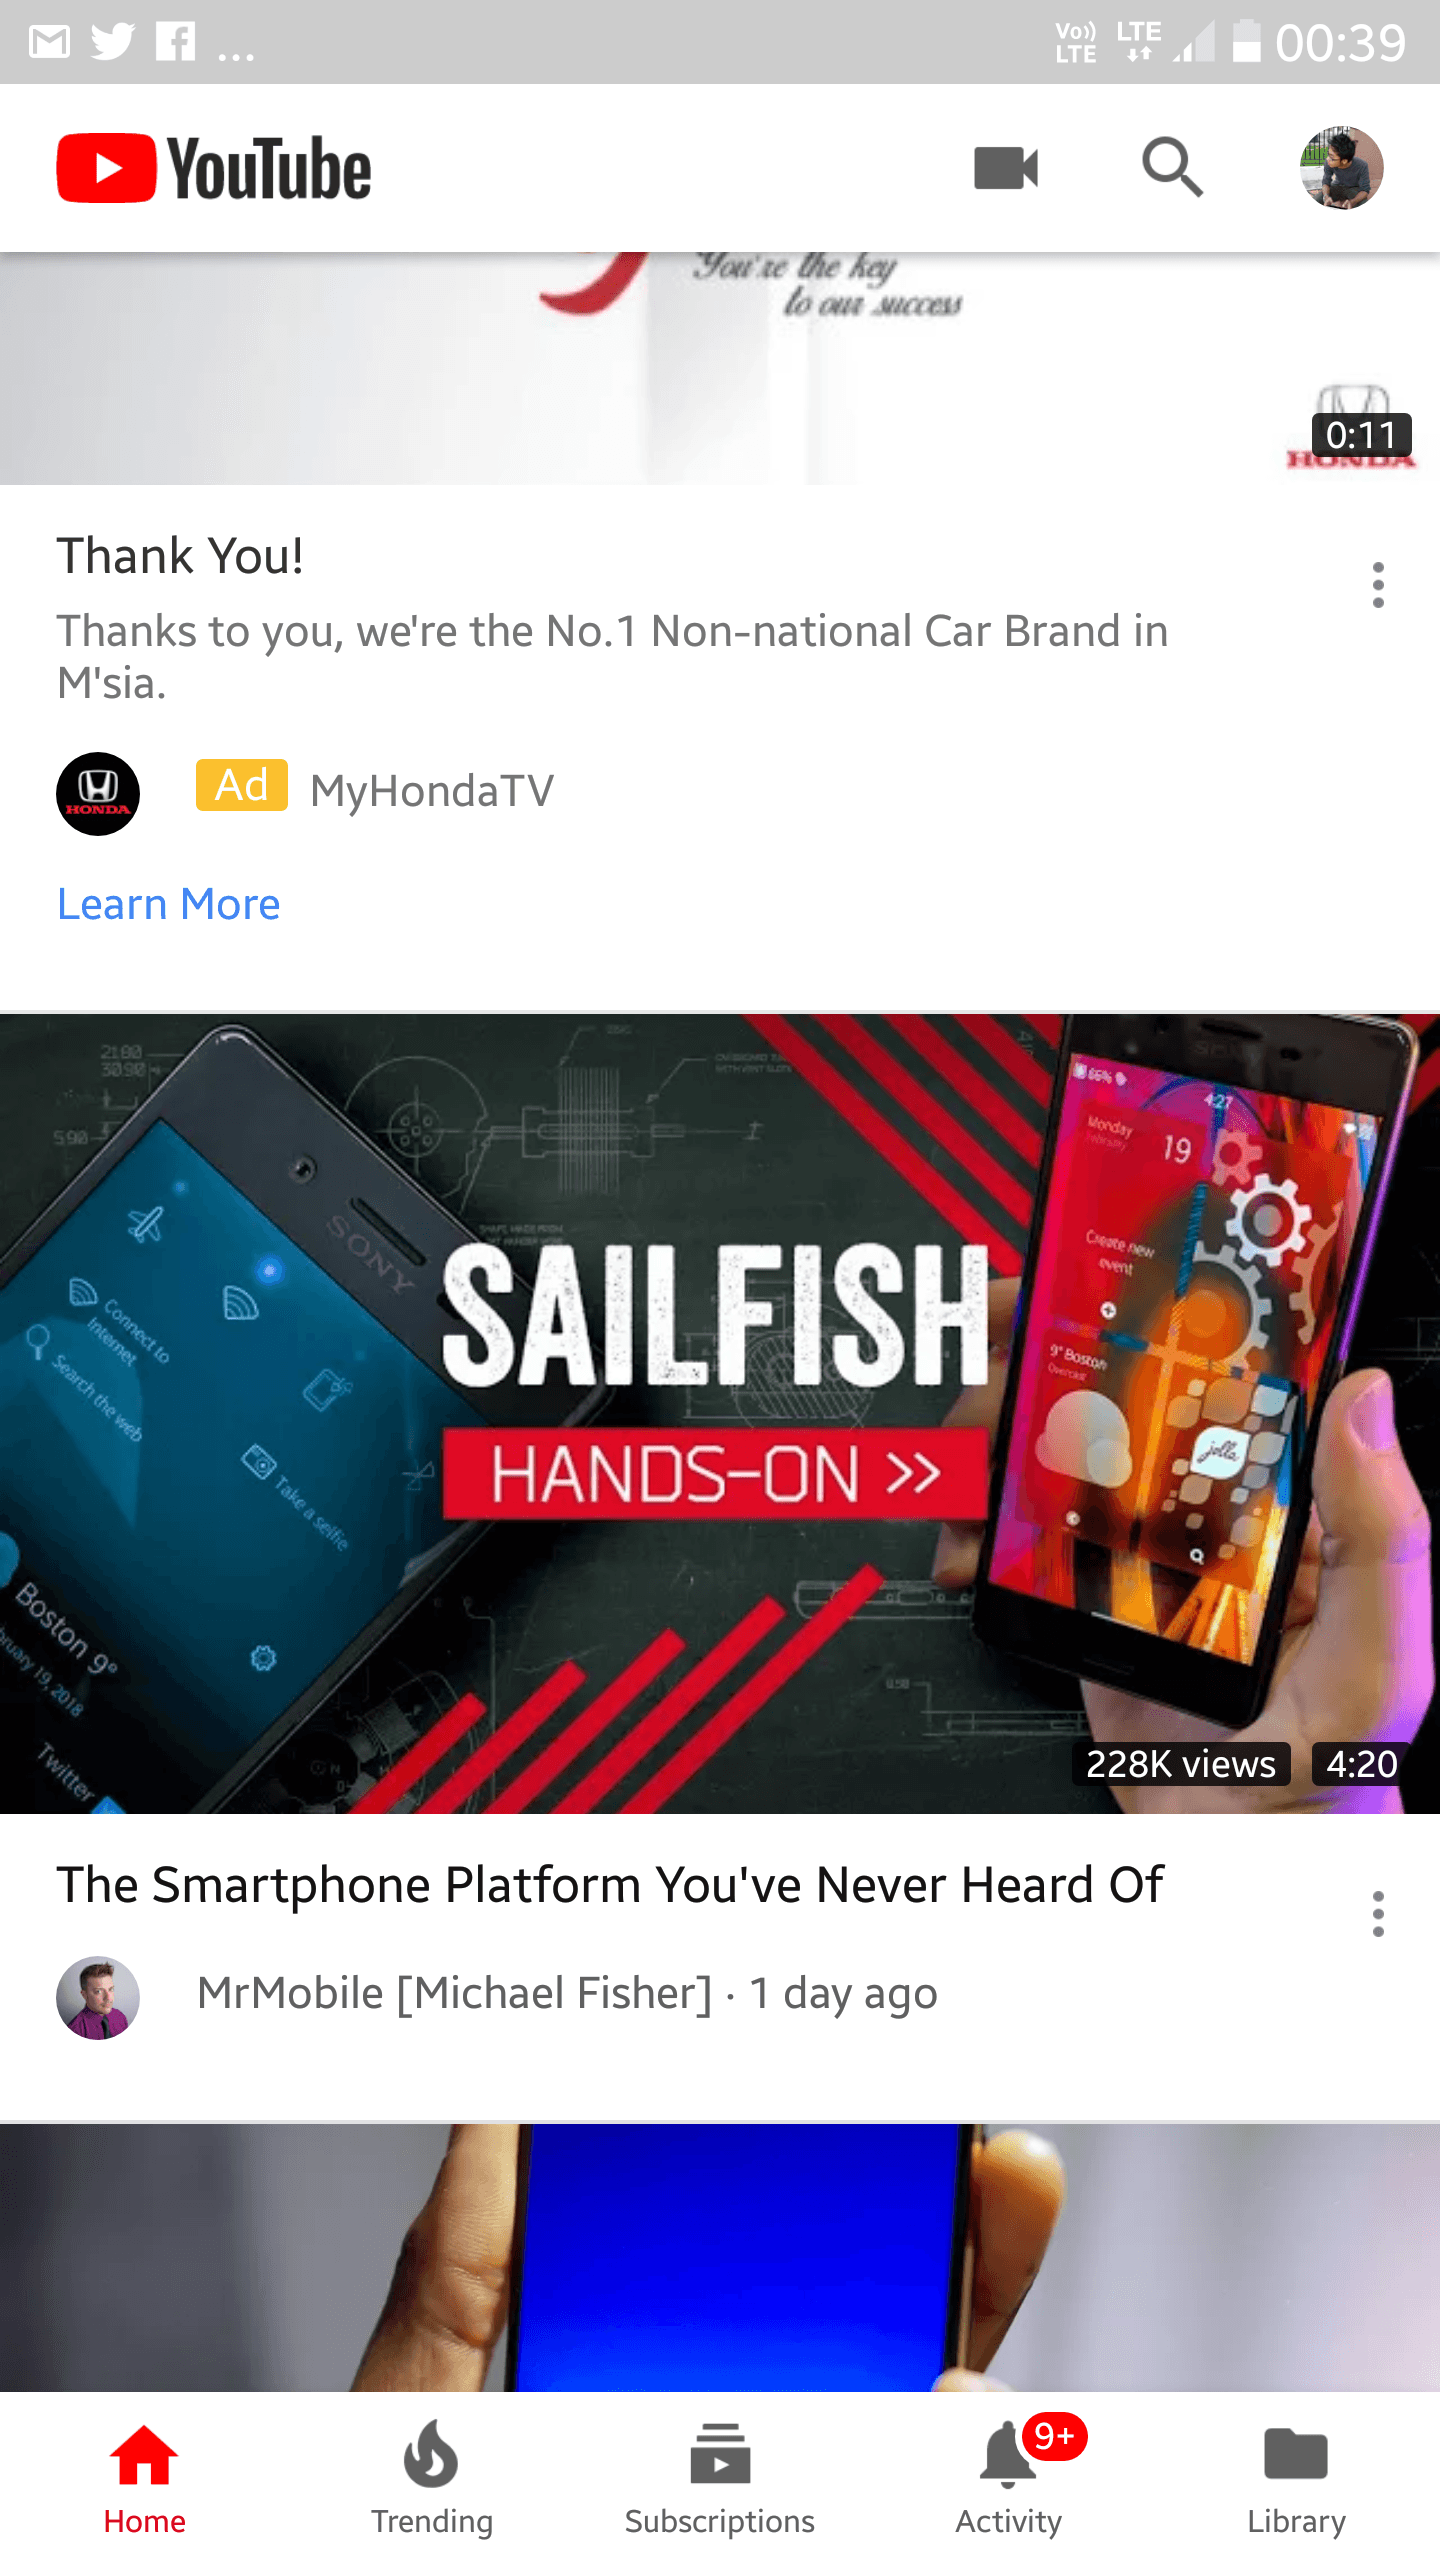 Title App Logo - YouTube app testing view count on thumbnail, adjusts layout